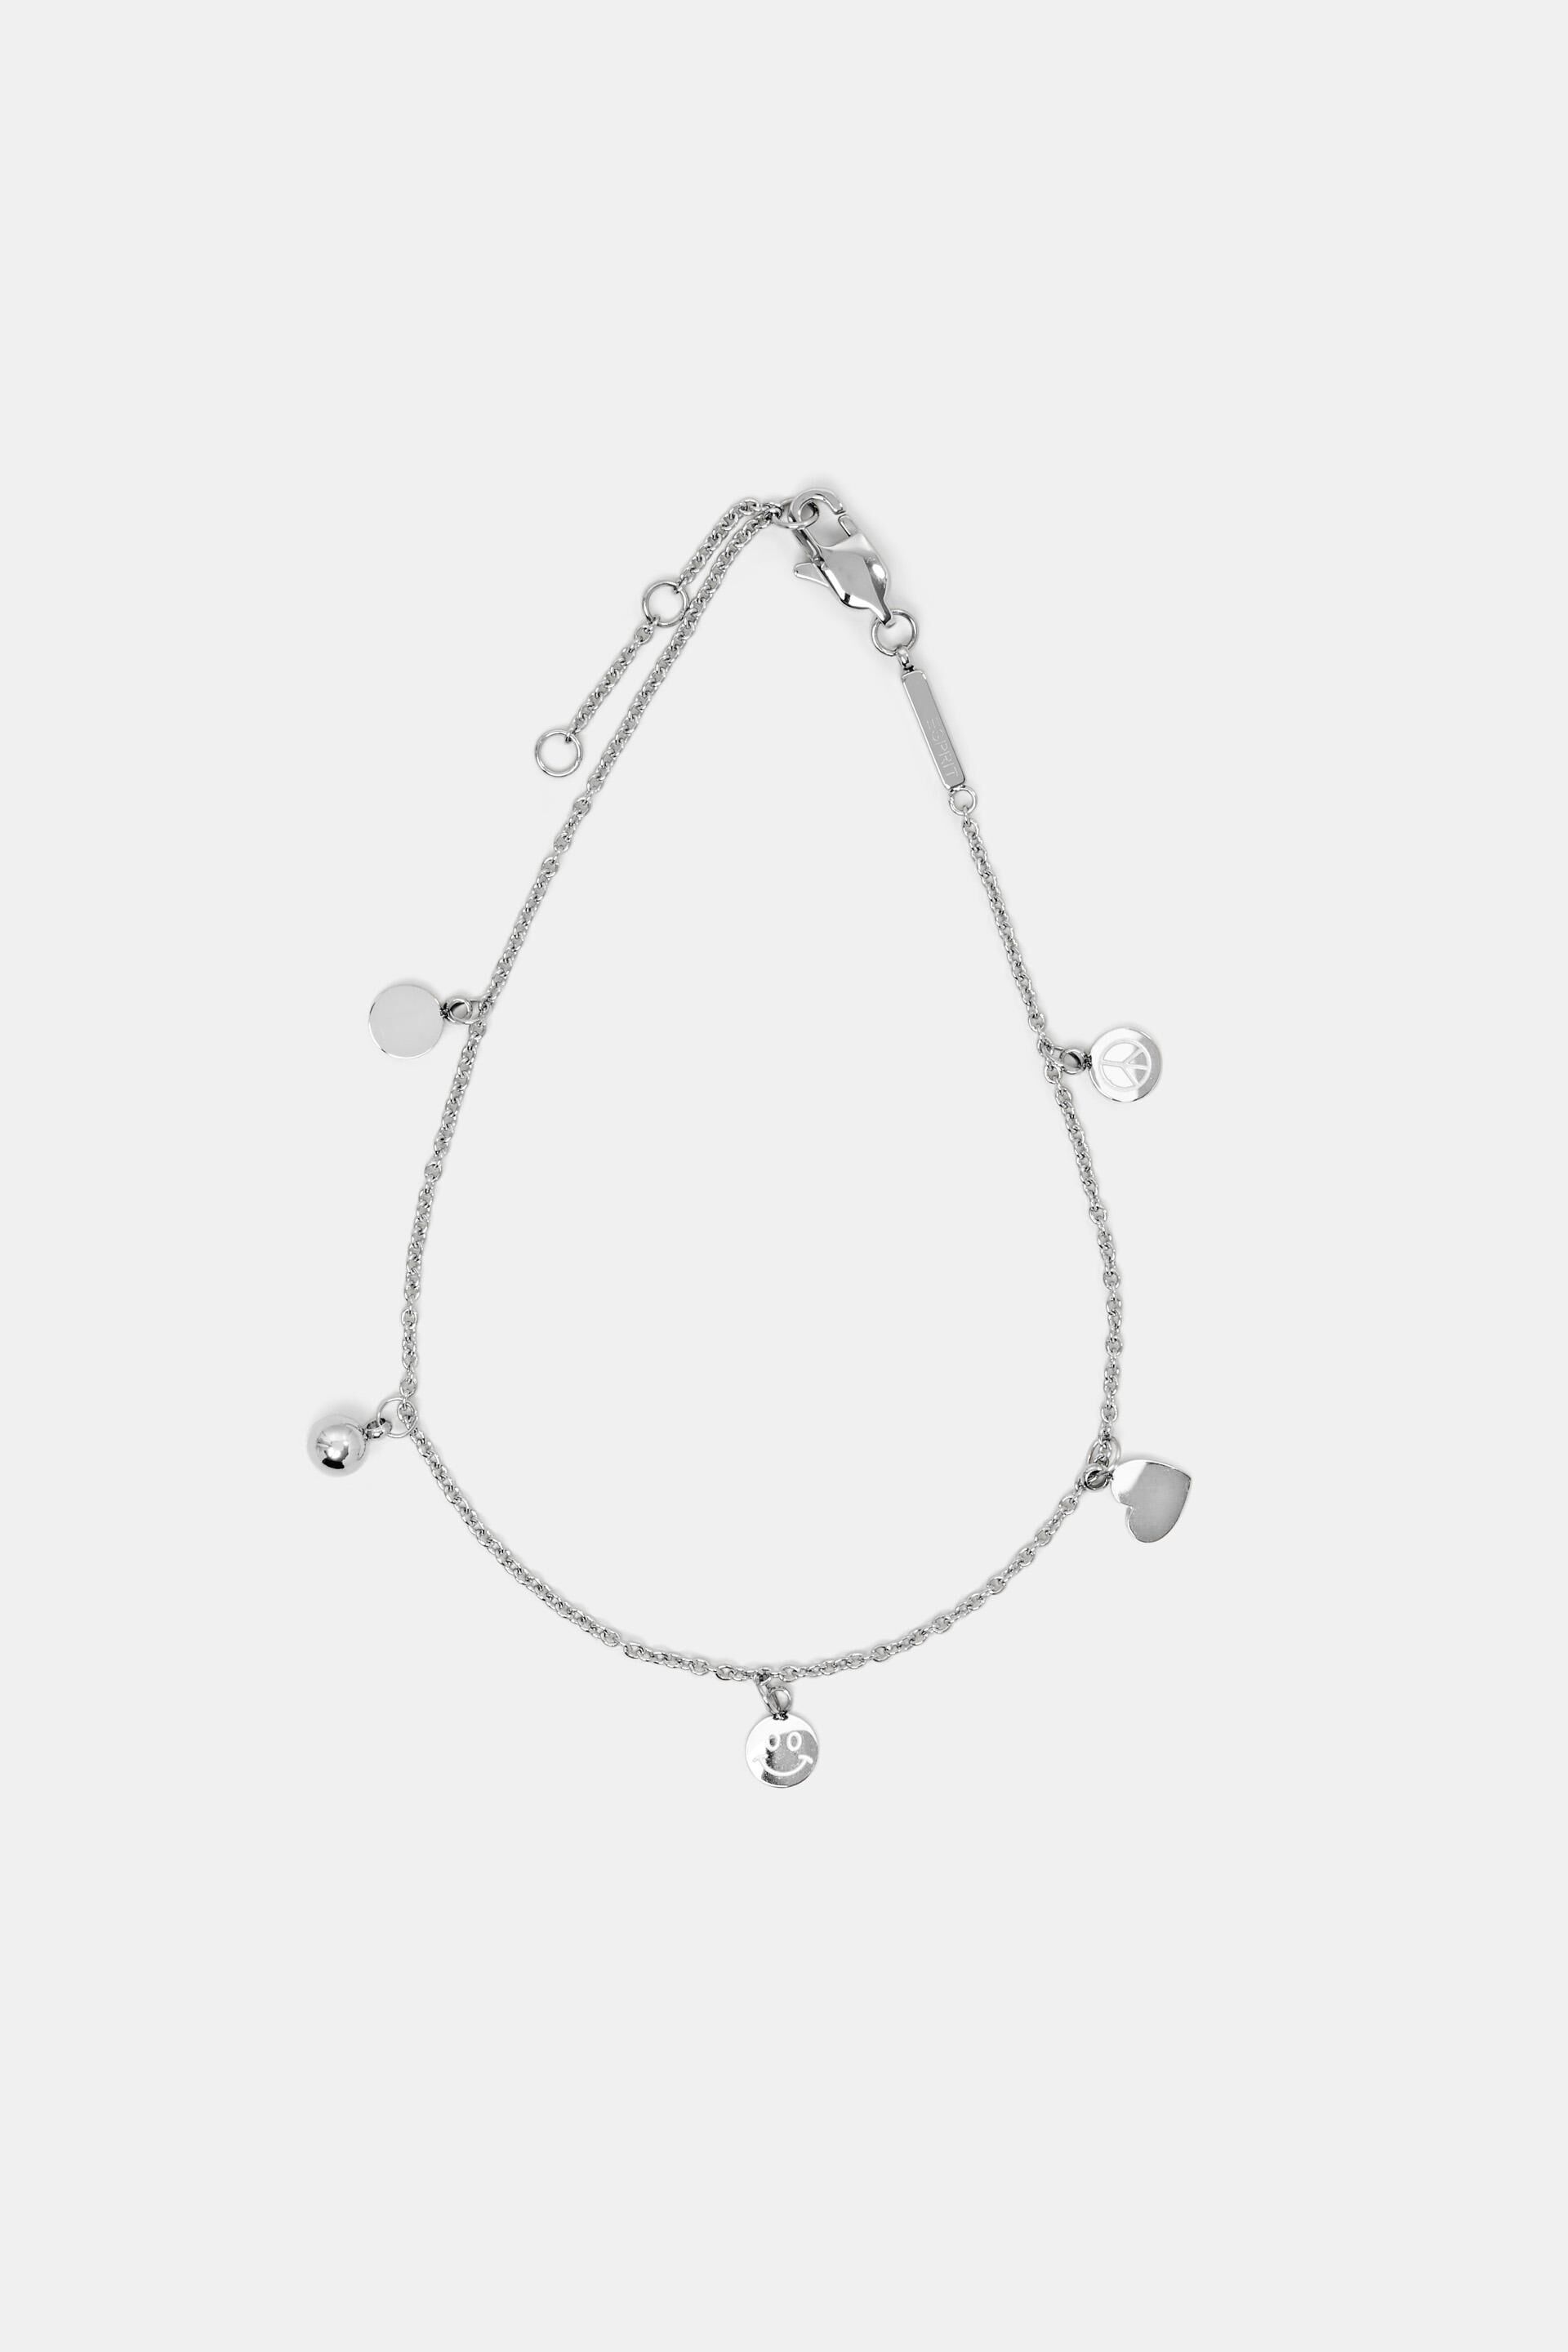 Esprit Lucky anklet, charms stainless steel